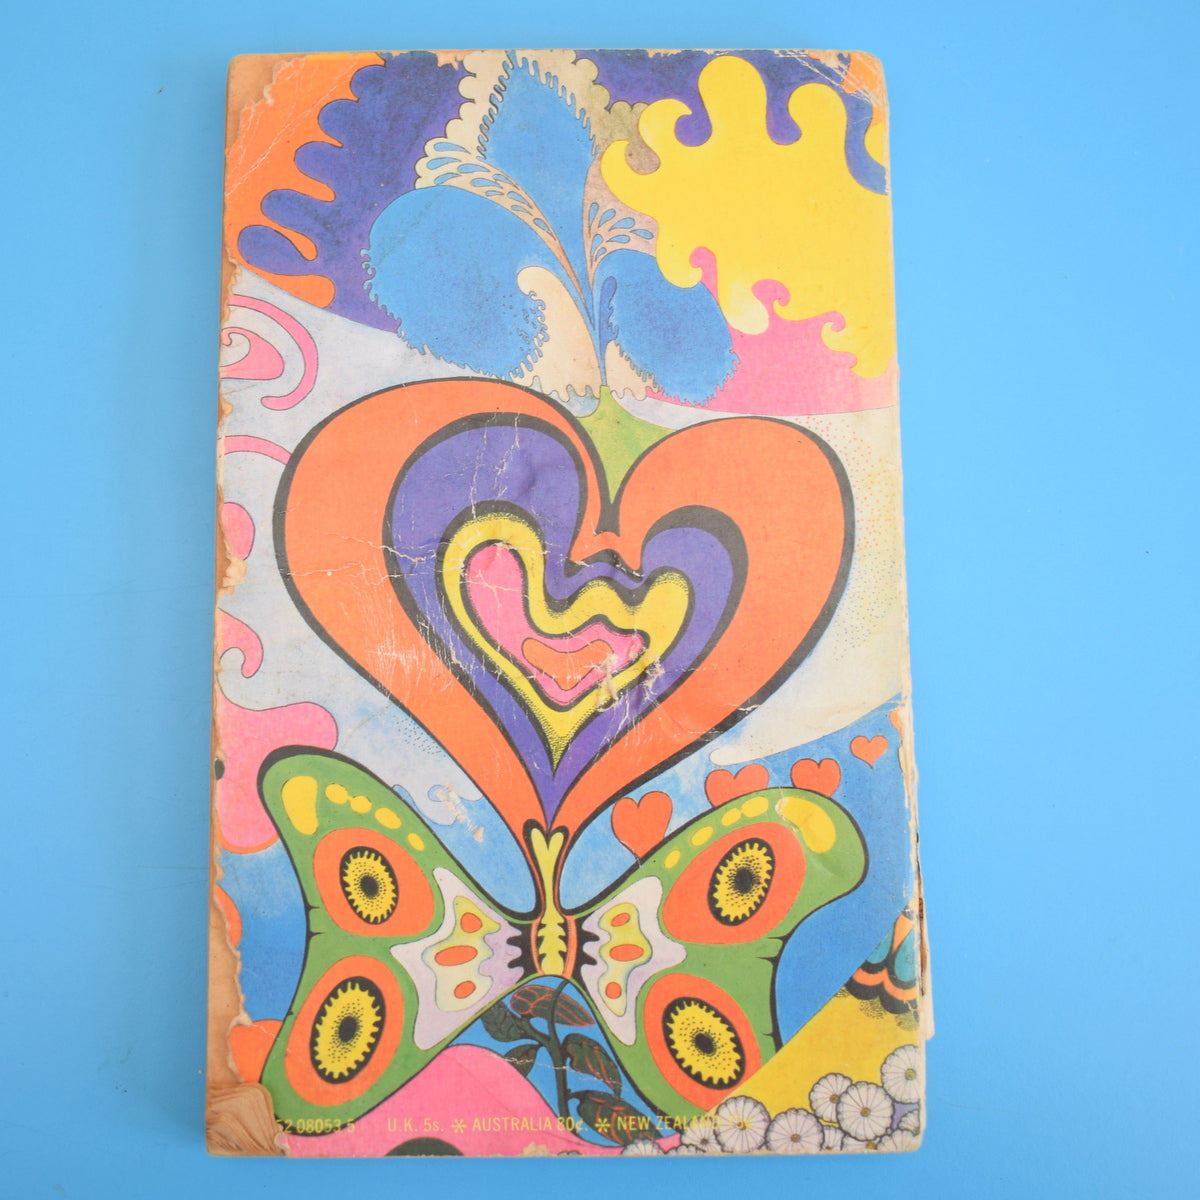 Vintage 1960s Kitsch Poetry Book - Love - Psychedelic